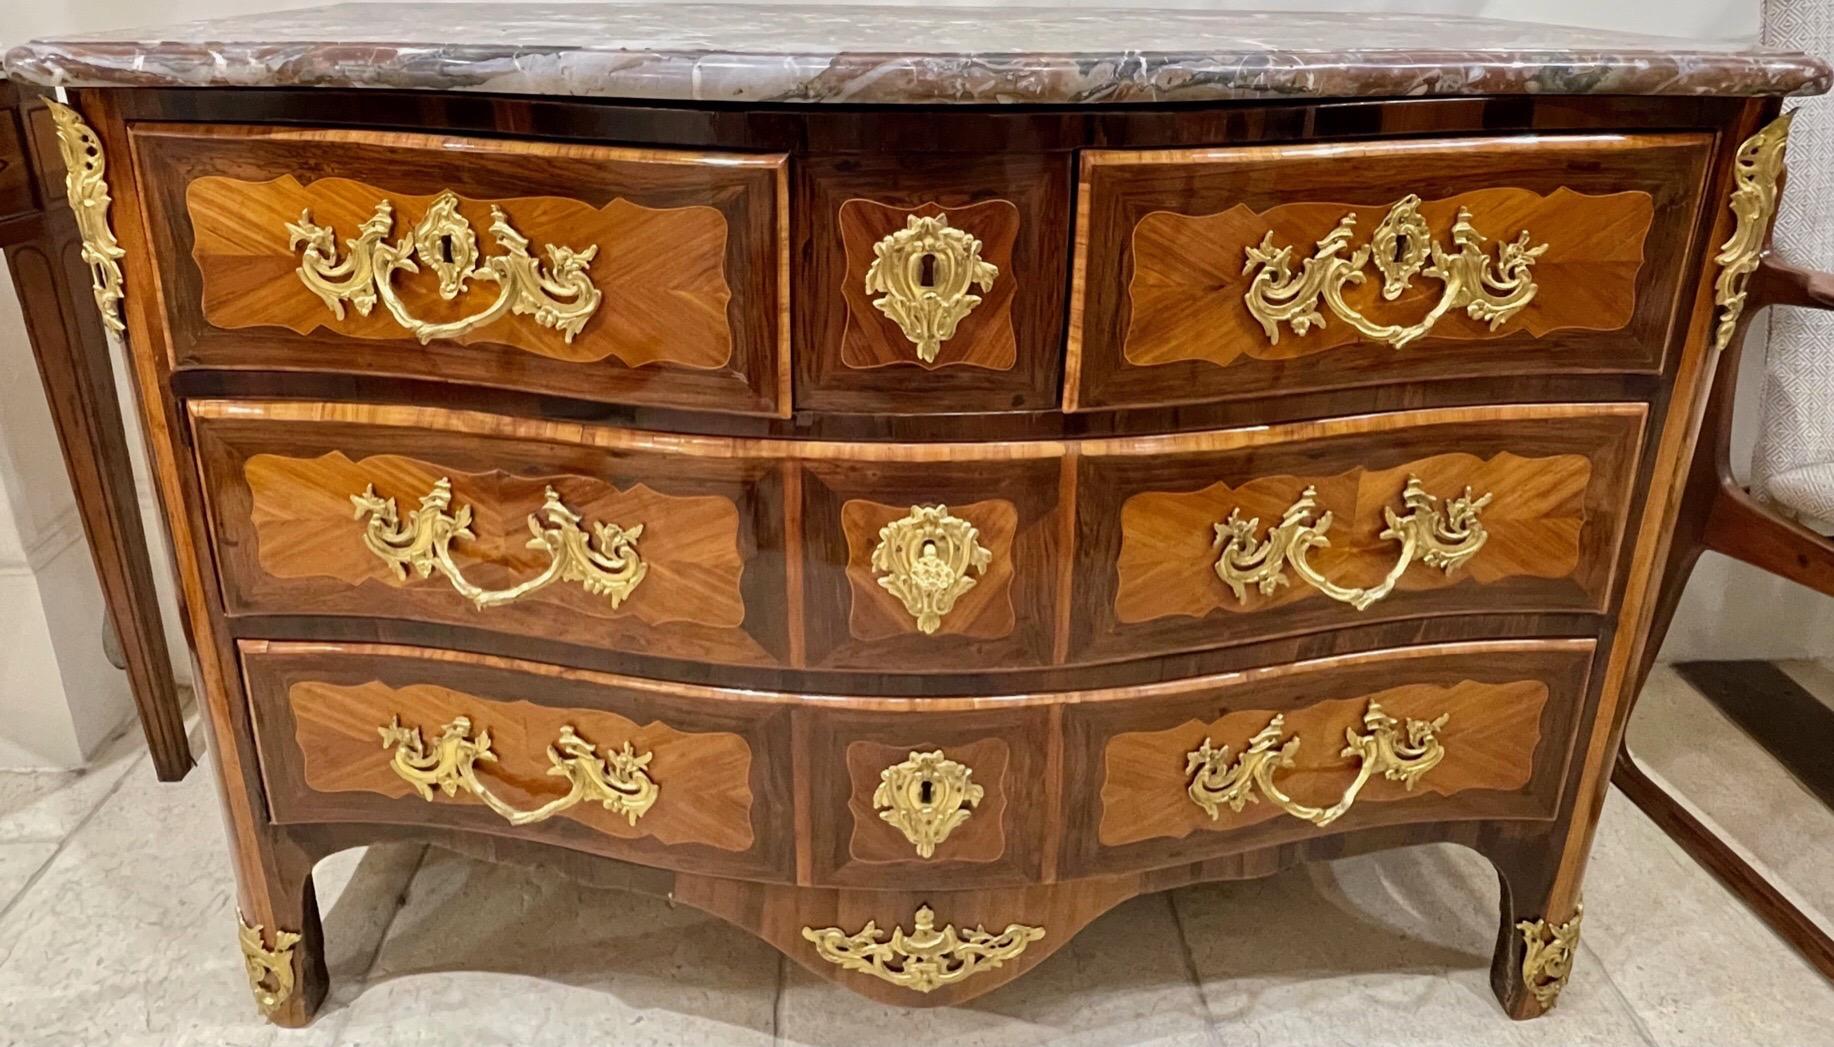 Elegant 18th century French mahogany and kingwood commode. Exceptional quality, featuring beautiful inlaid wood pattern, bronze mounts and a marble top. The piece is signed by M. Magnien. Superb!